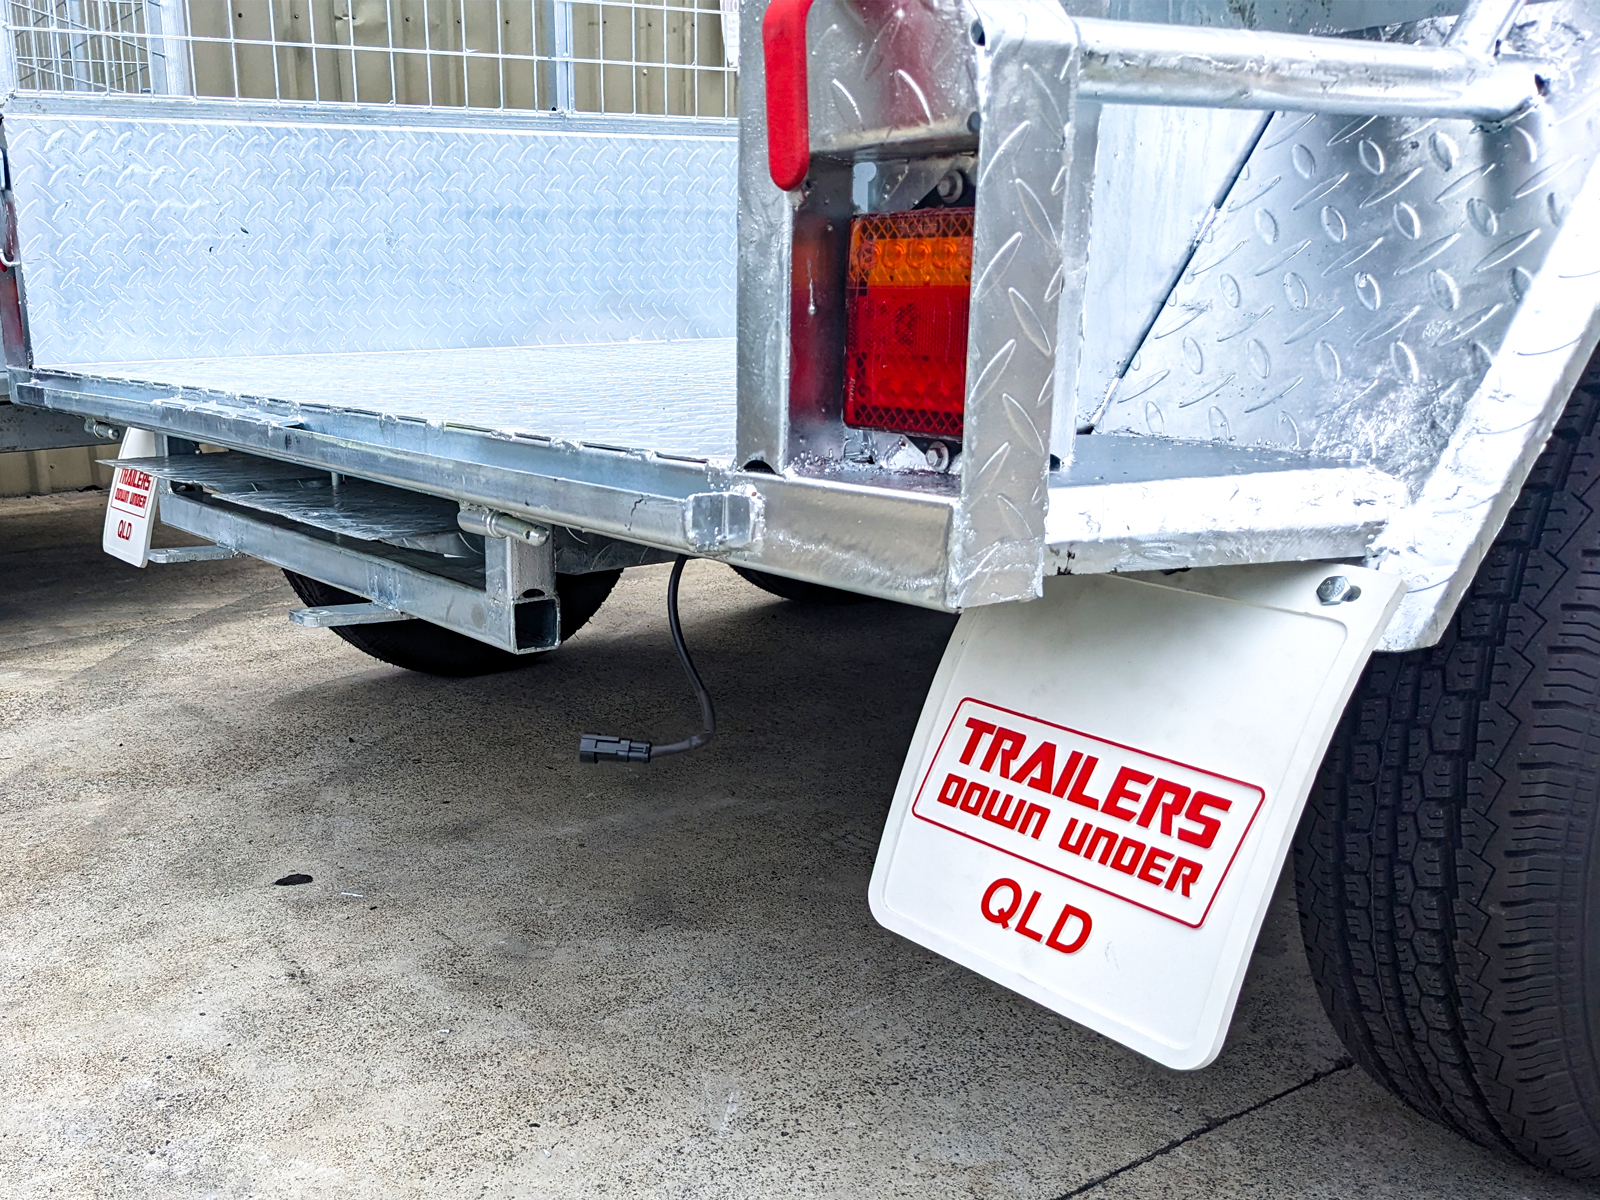 Galvanised Trailer with Full Checker Plate